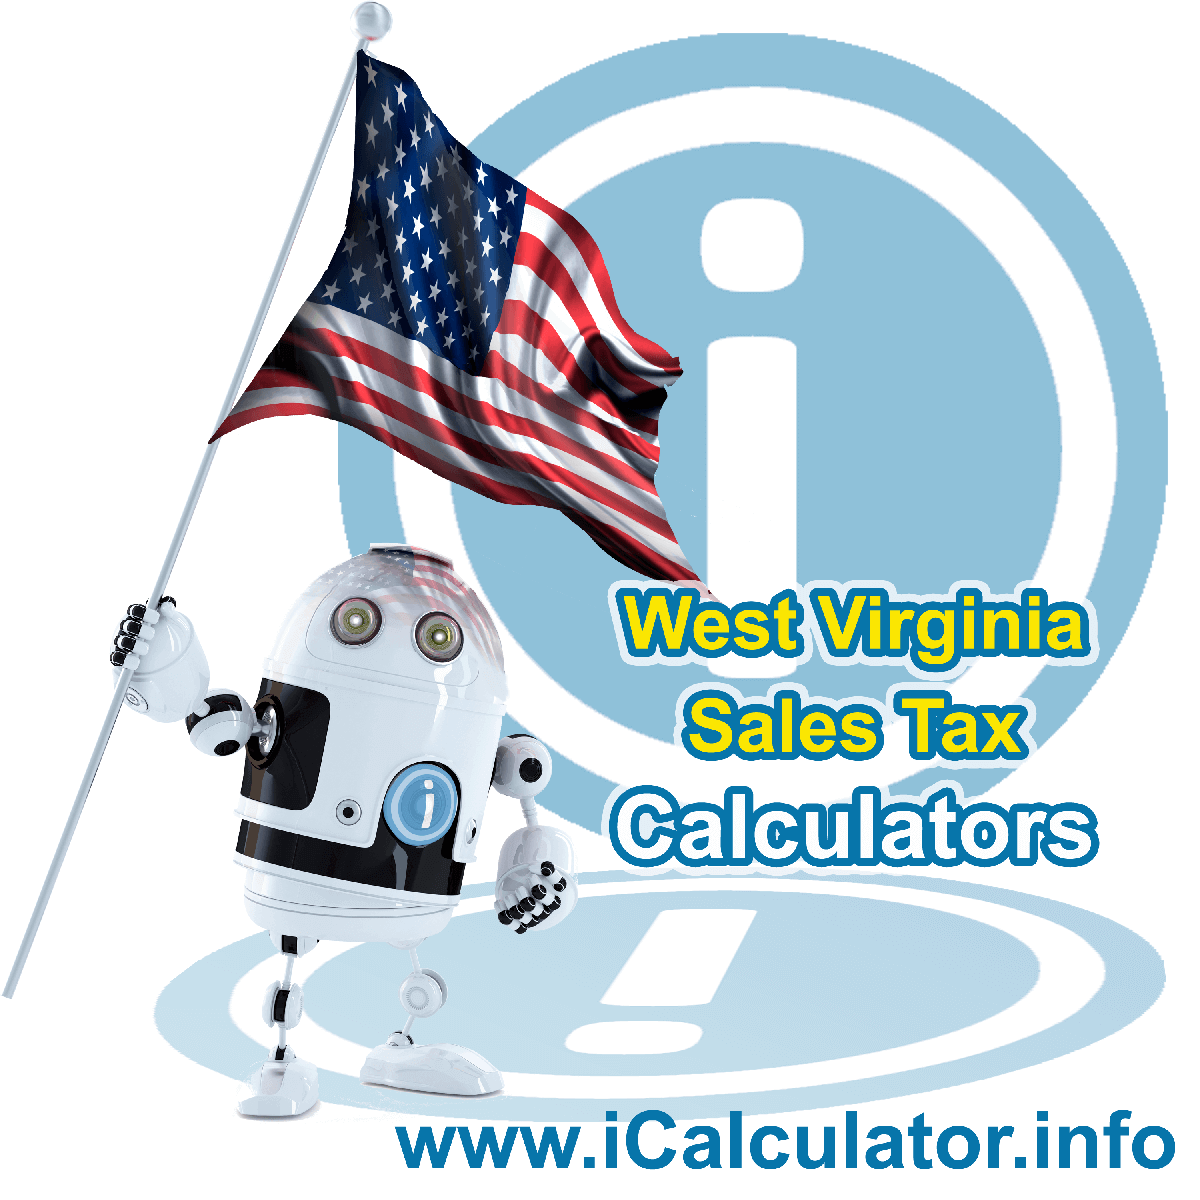 Oak Hill, West Virginia Sales Tax Comparison Calculator: This image illustrates a calculator robot comparing sales tax in Oak Hill, West Virginia manually using the Oak Hill, West Virginia Sales Tax Formula. You can use this information to compare Sales Tax manually or use the Oak Hill, West Virginia Sales Tax Comparison Calculator to calculate and compare Oak Hill, West Virginia sales tax online.